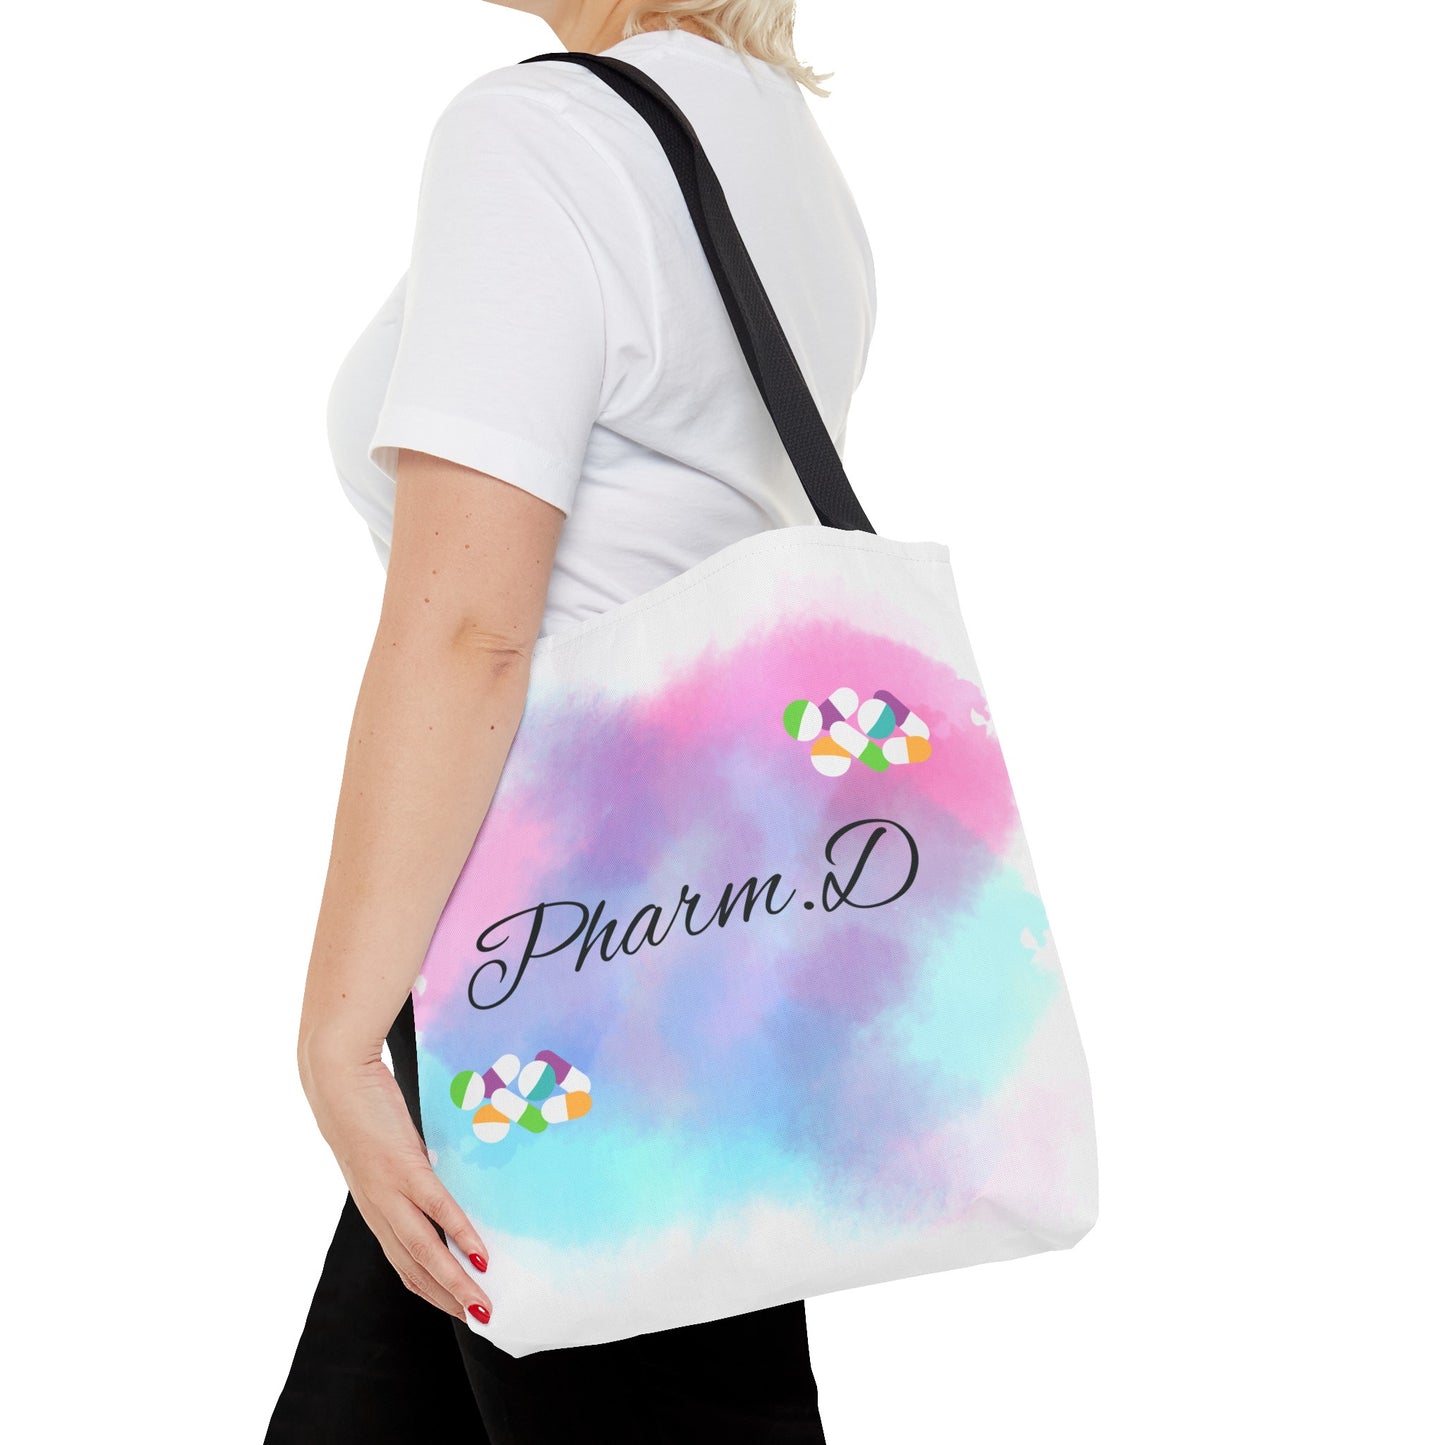 Pharm.D.- Tote Bag Doctor of Pharmacy Credentials